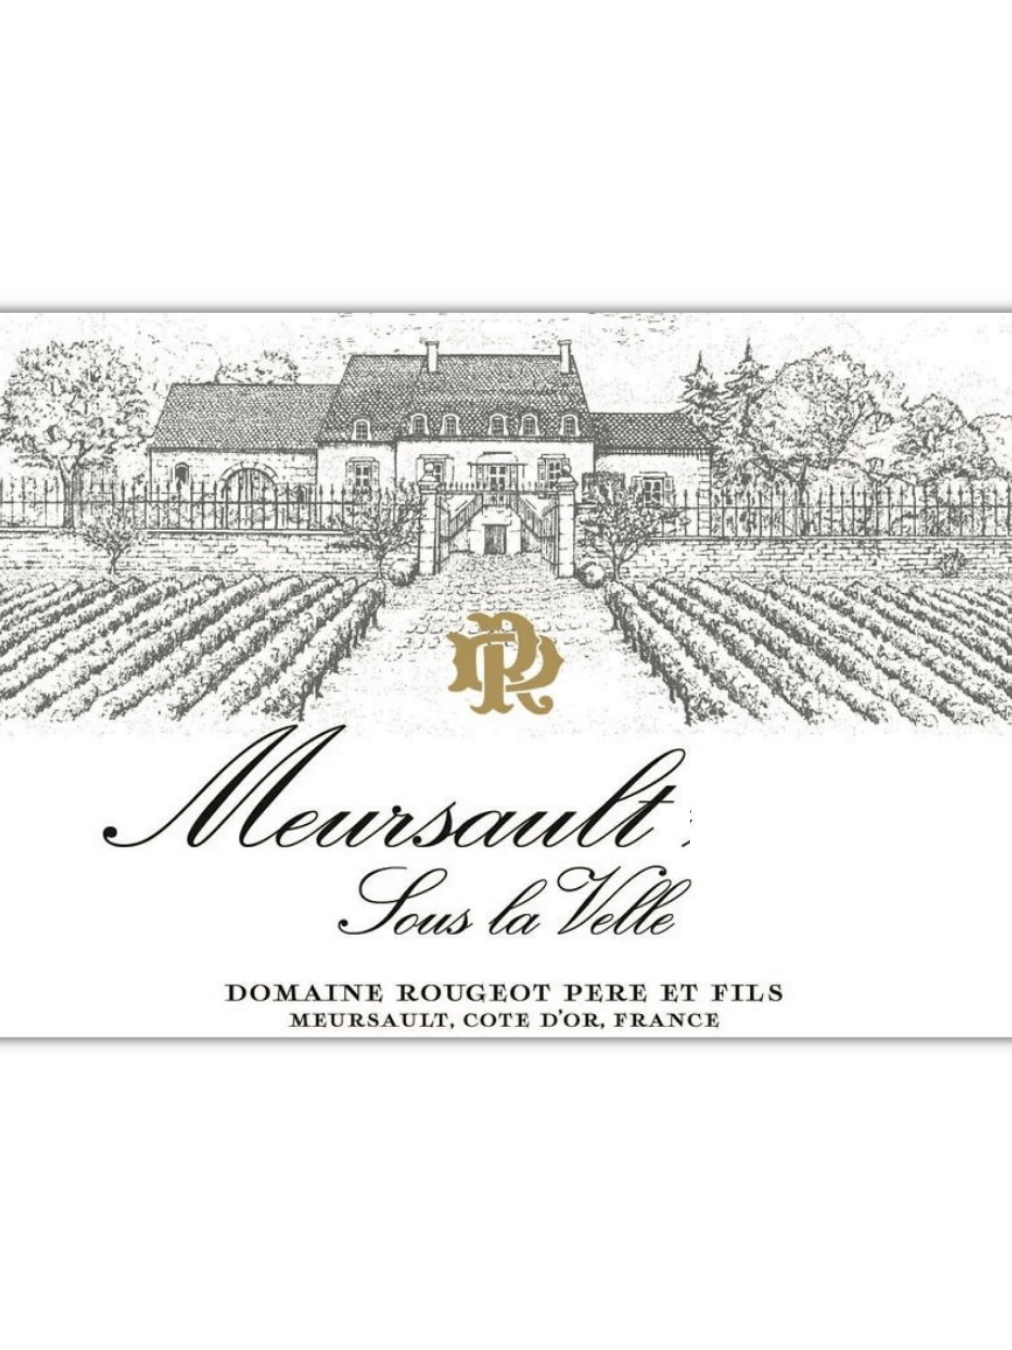 Shop Domaine Rougeot Père & Fils Domaine Rougeot | Meursault Sous la Velle 2018 online at PENTICTON artisanal French wine store in Hong Kong. Discover other French wines, promotions, workshops and featured offers at pentictonpacific.com 